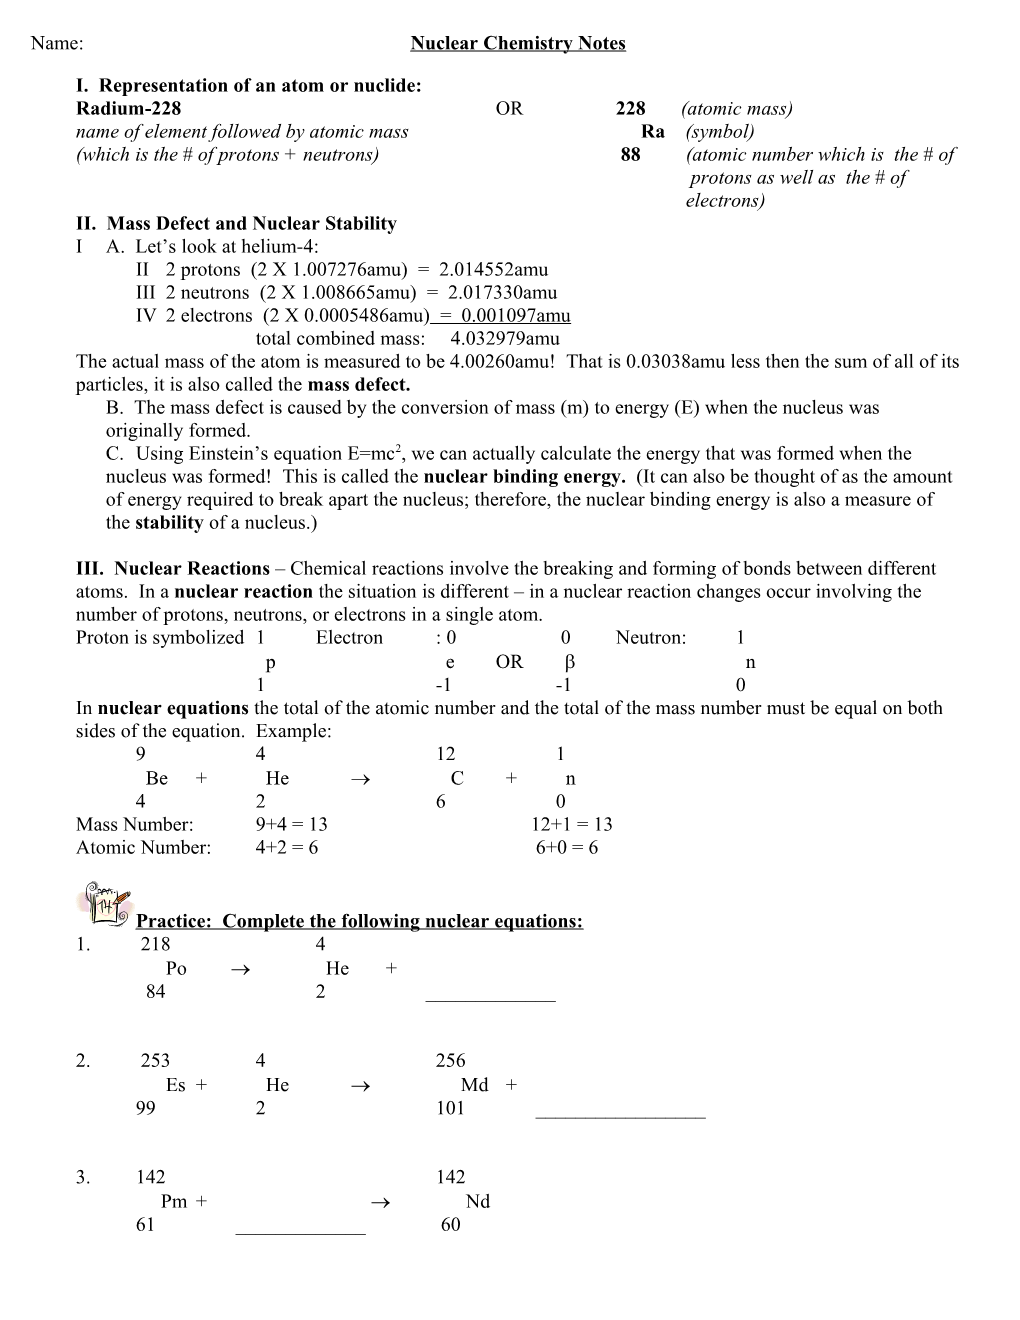 Nuclear Chemistry Notes and Worksheet